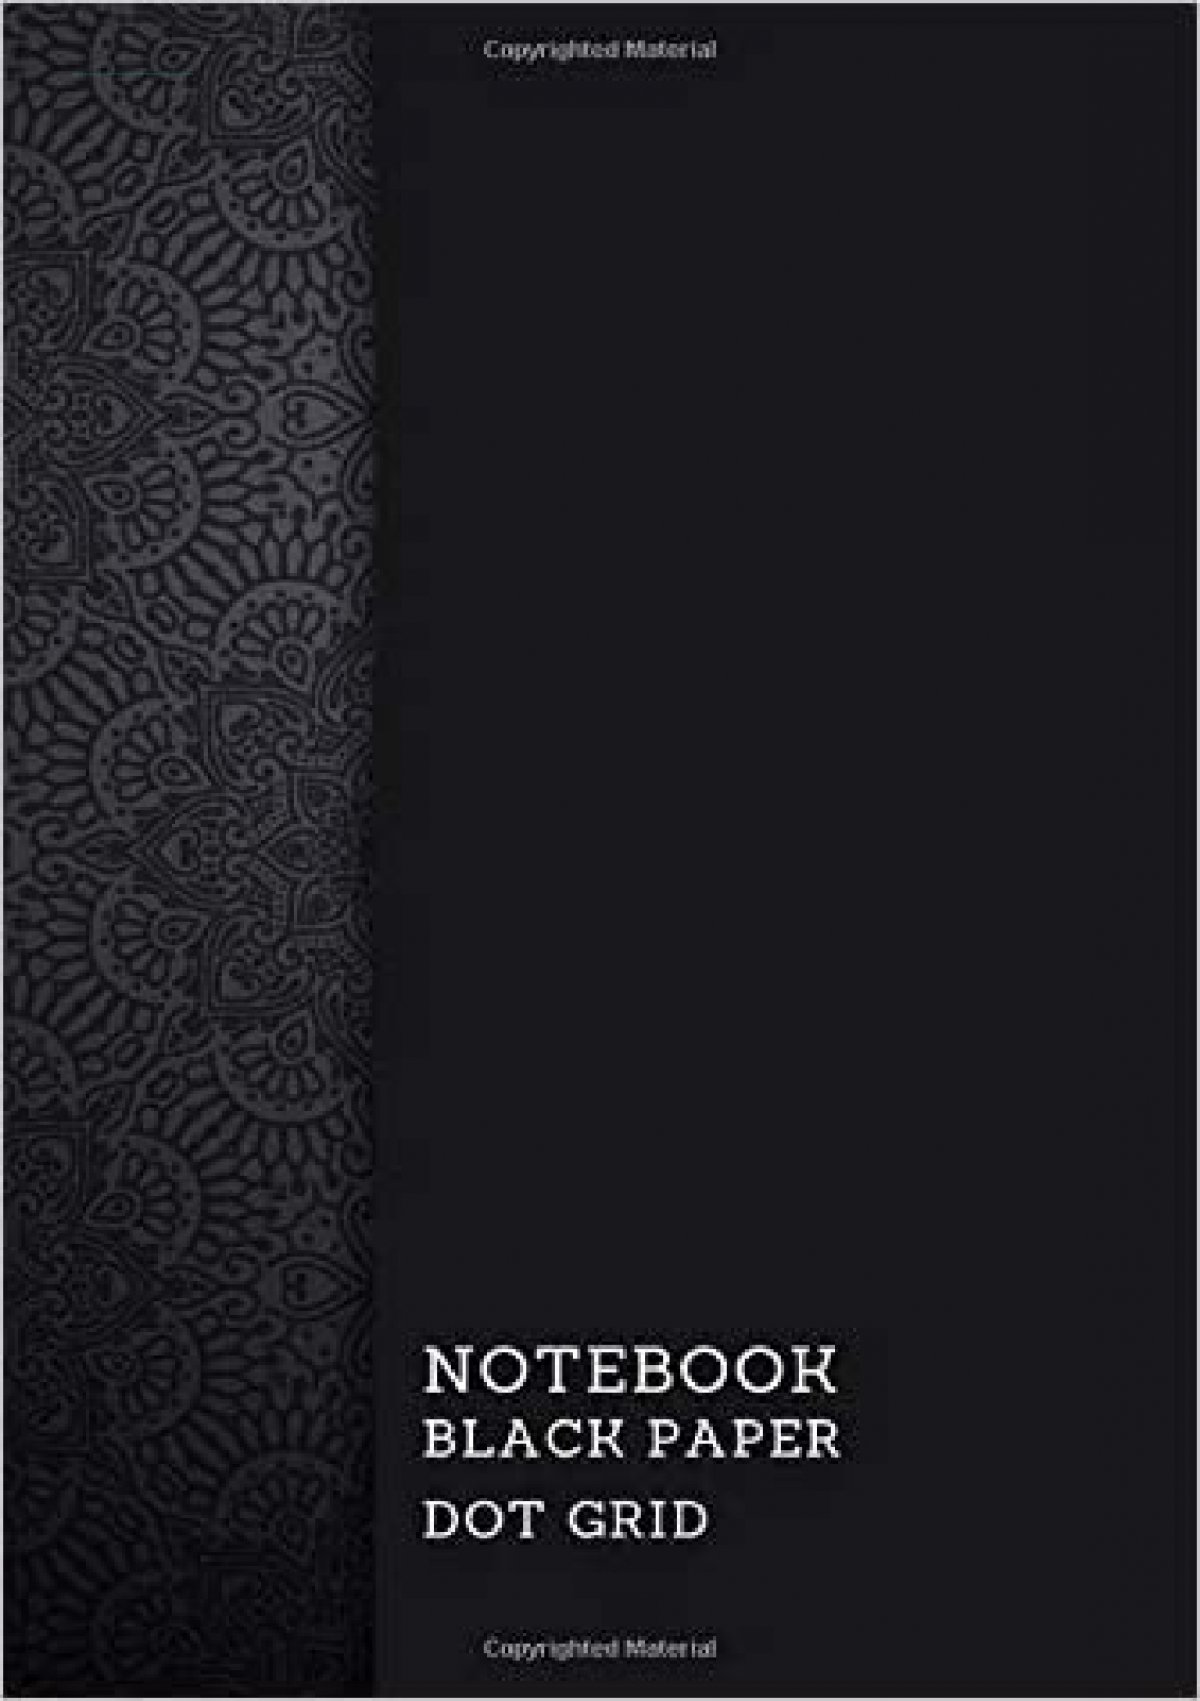 Black Paper Dot Grid: A Black Paper Dot Grid Notebook For Use With Gel Pens